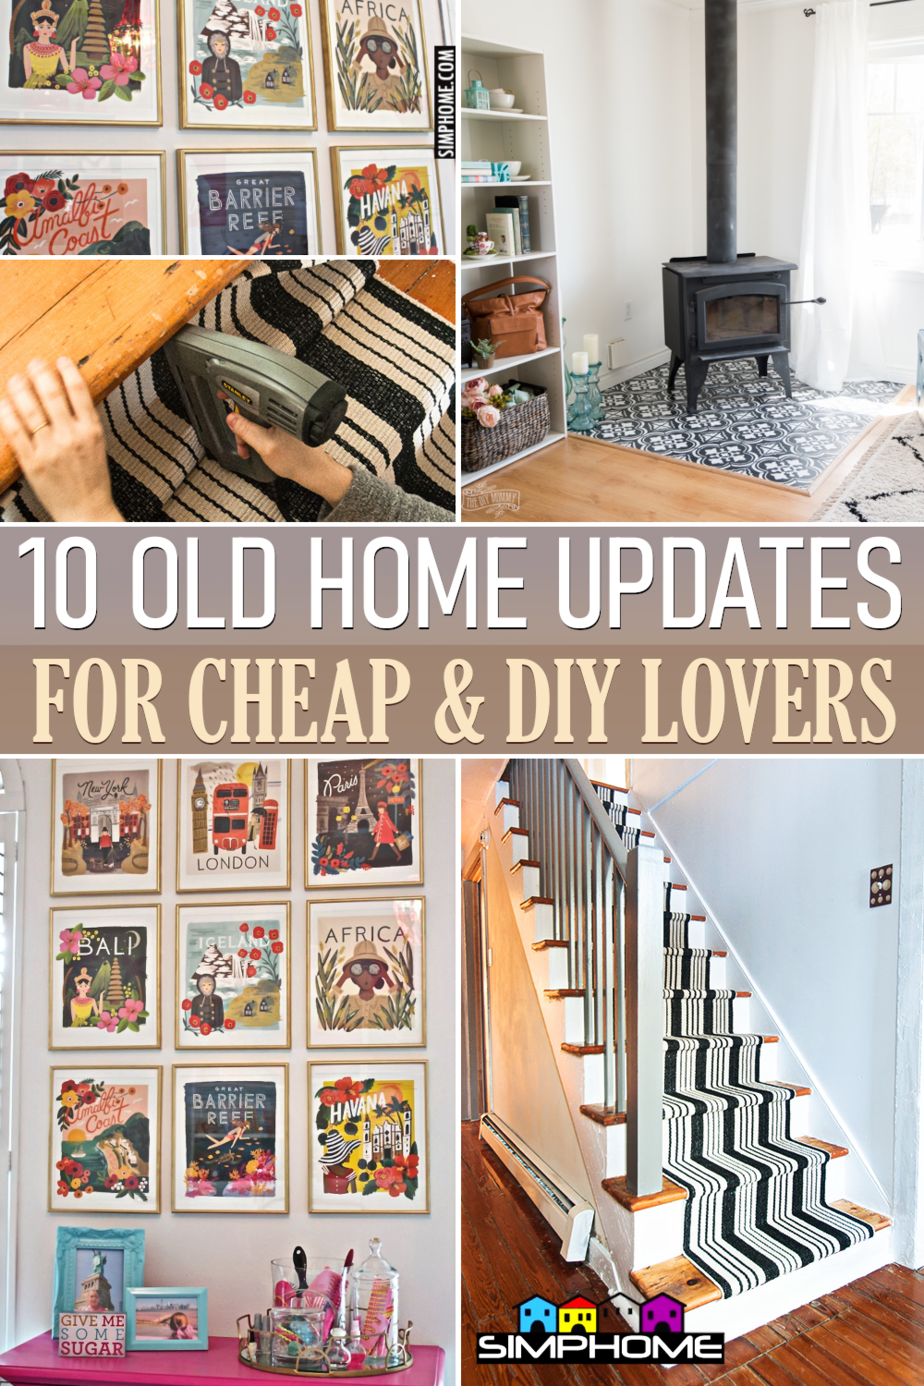 10 Ideas on how to update older homes on a budget via Simphome.comFeatured